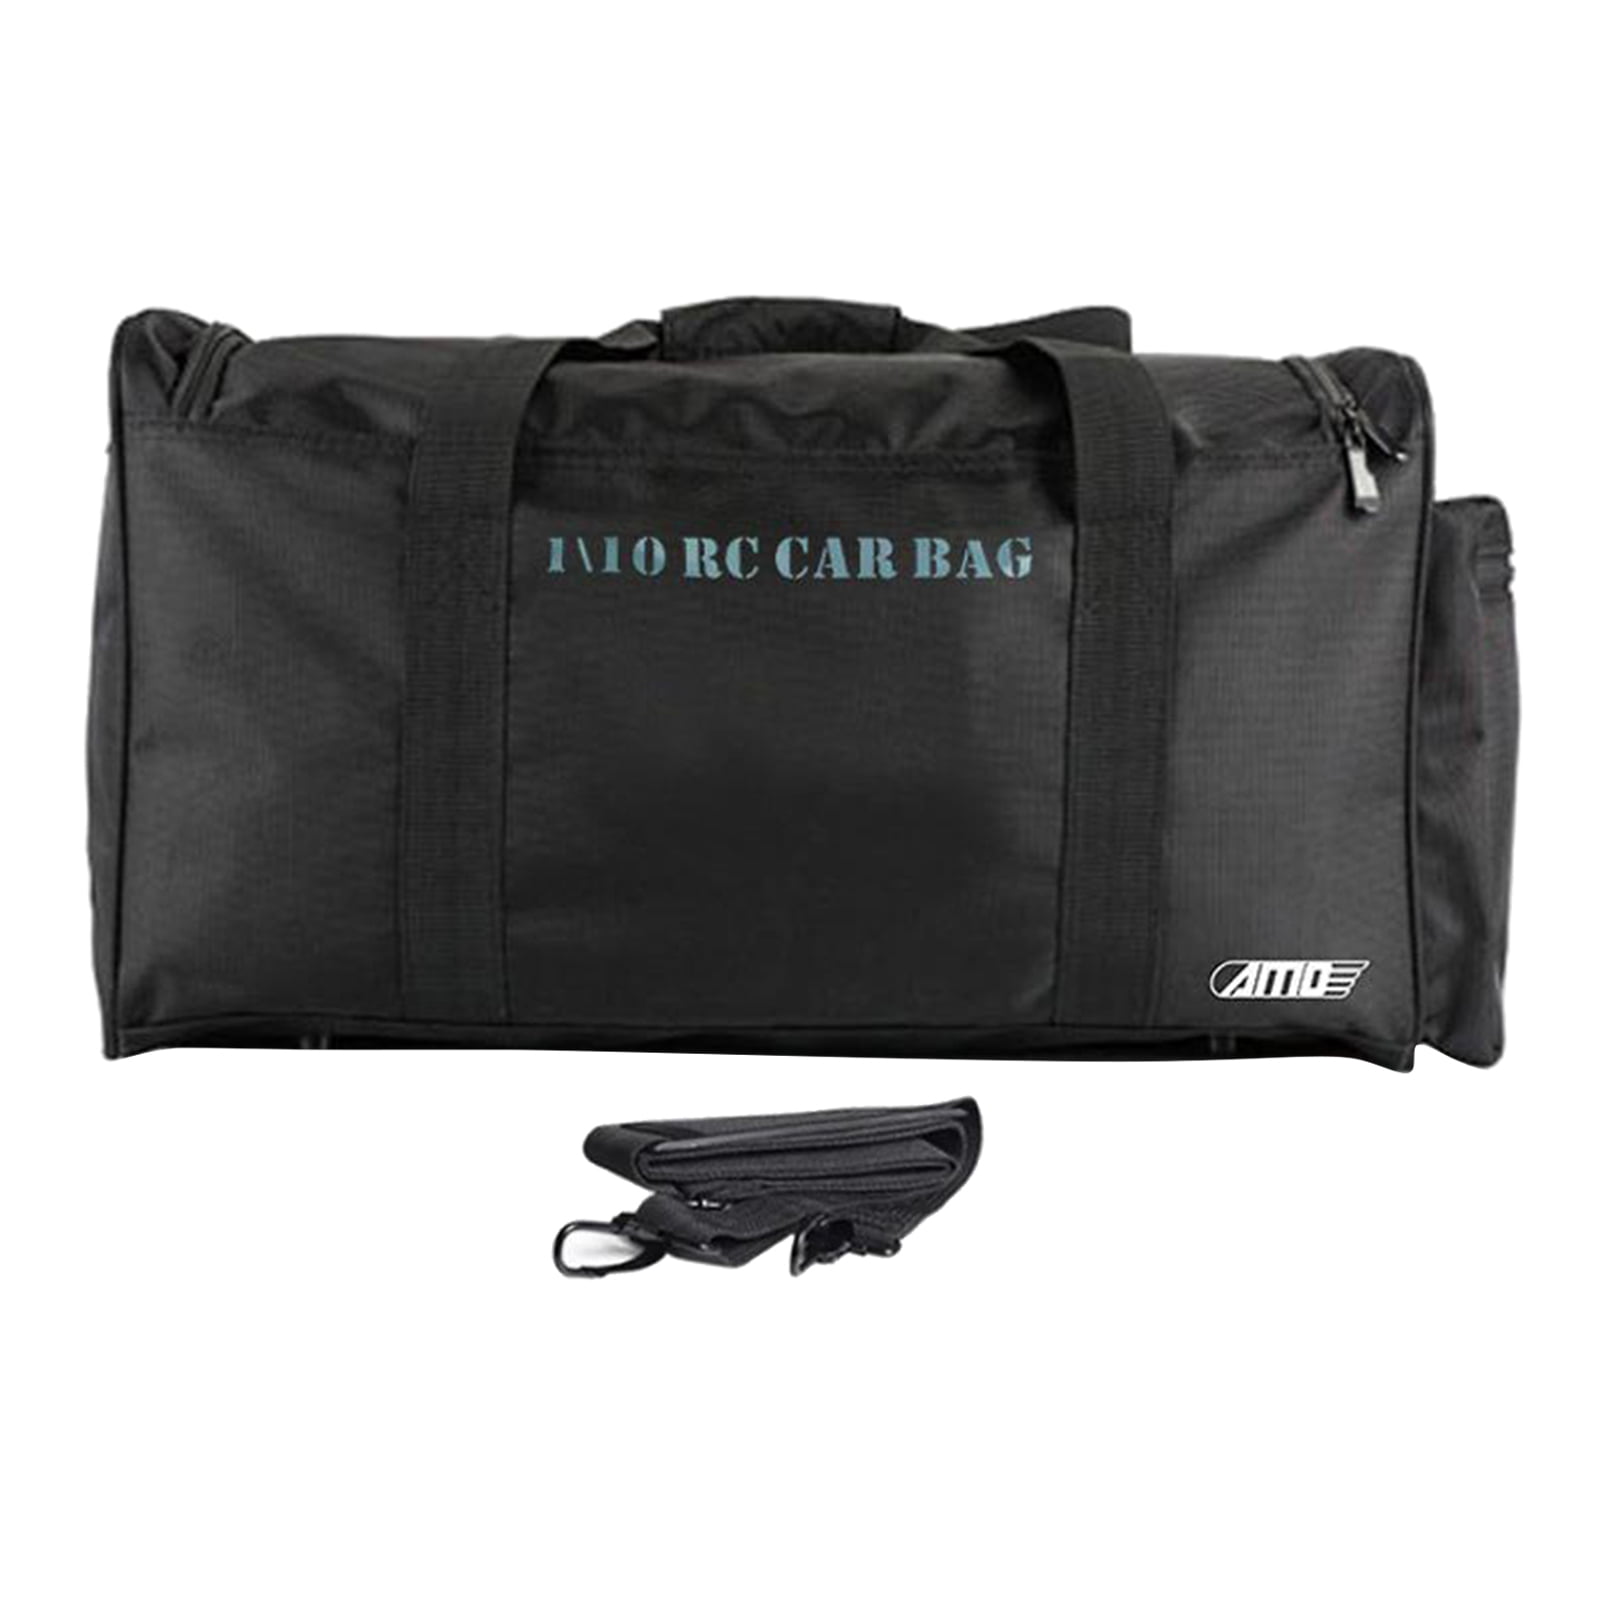 Cloth Backpack Case Carry Storage Bag for 1:10 RC Drift Car Large Capacity 